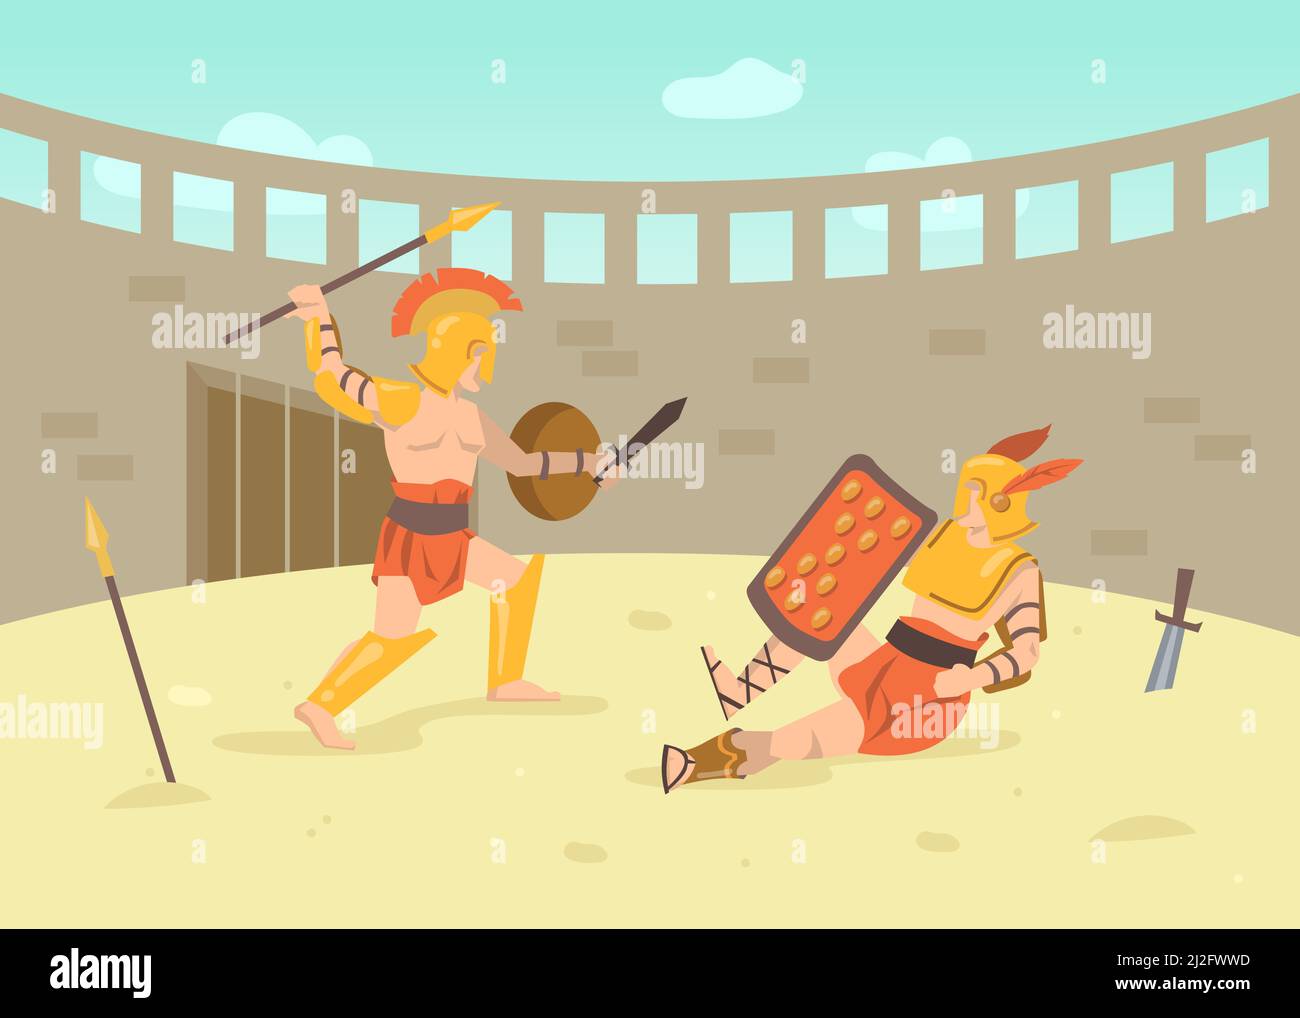 Two roman armored warriors fighting with swords on arena. Cartoon vector illustration. Gladiator fight in Colosseum battlefield of ancient Rome, Greec Stock Vector